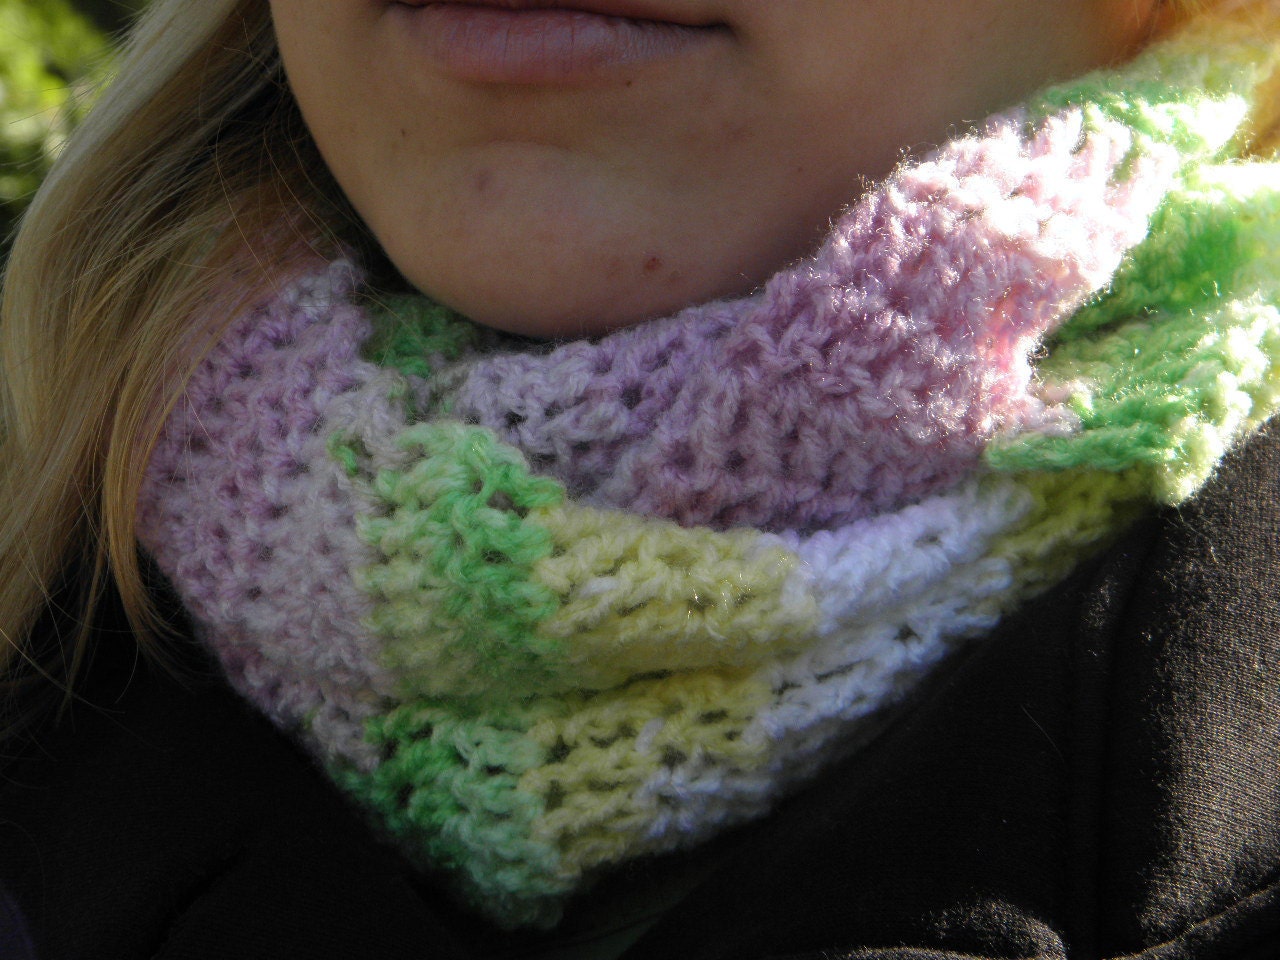 Cowl neck Scarf Acrylic and Polyamide warmer pink green white yellow